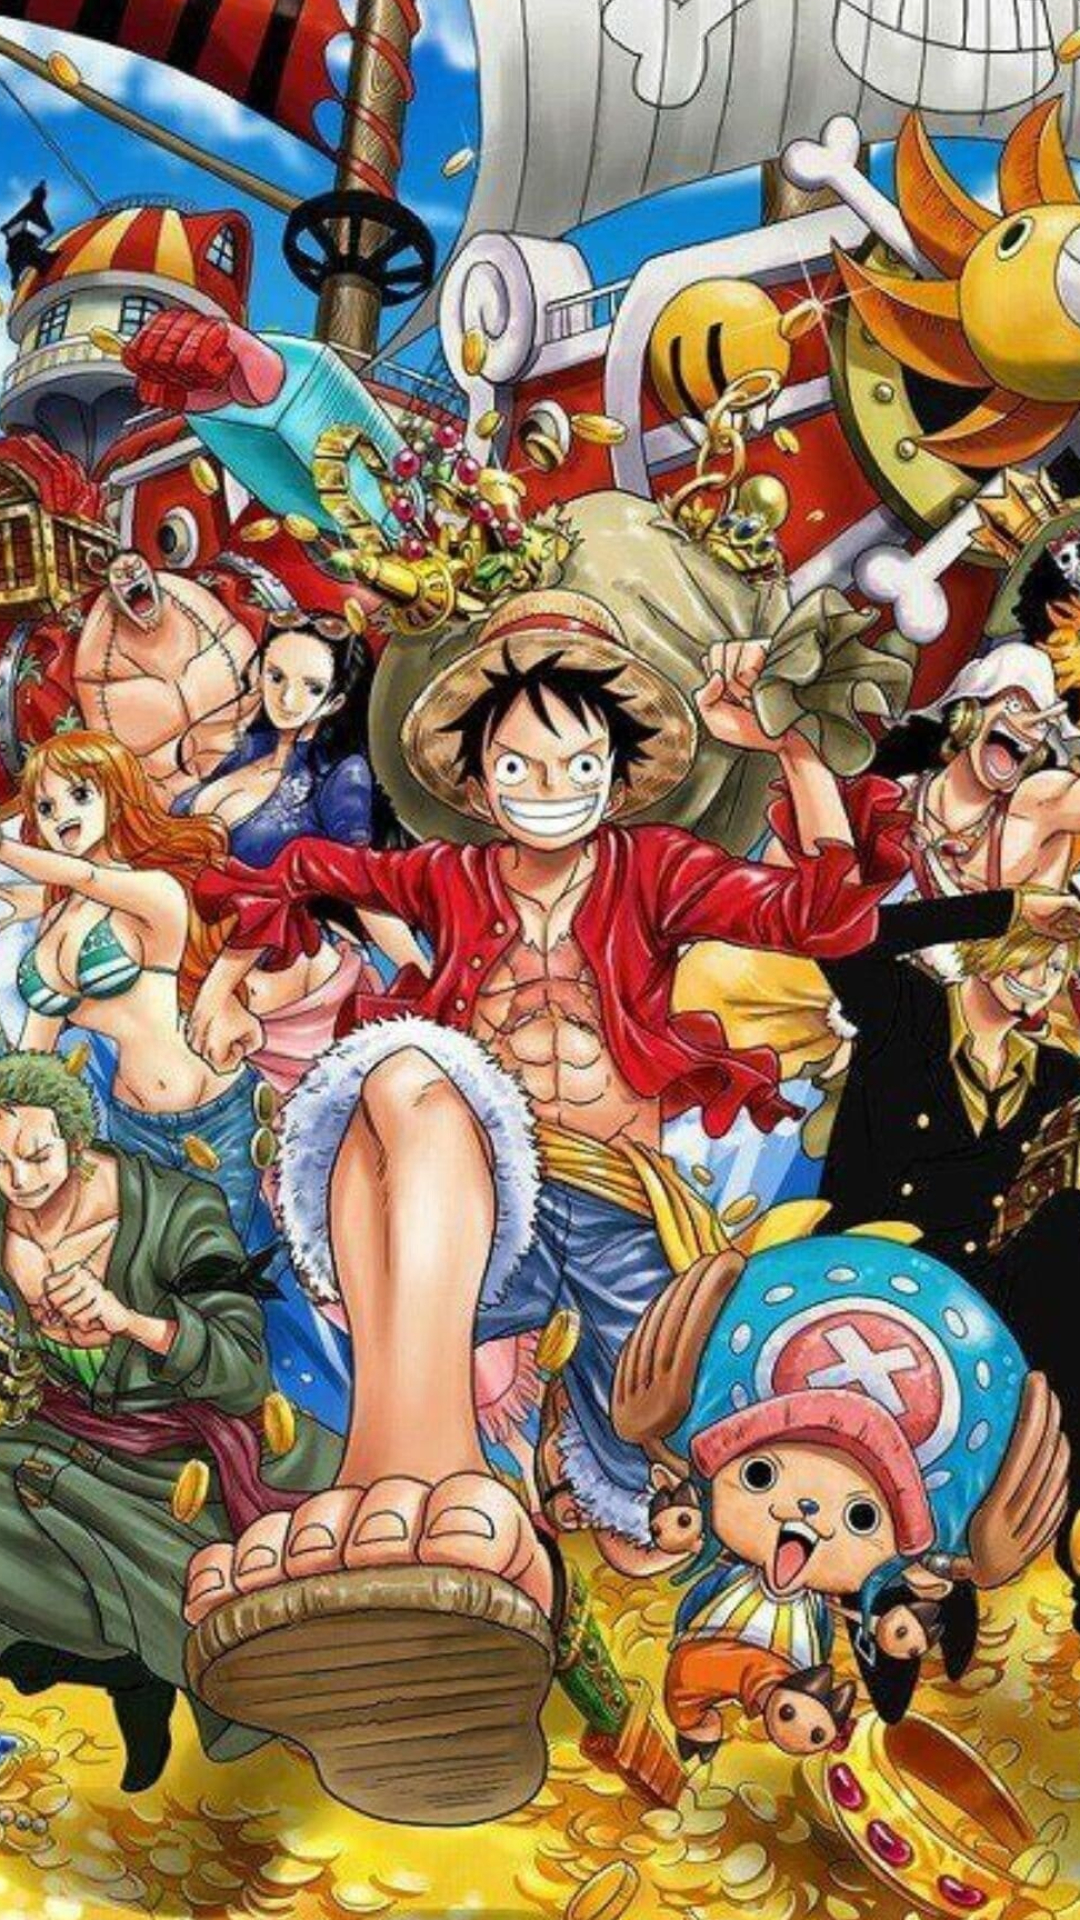 One Piece: The best-selling single-author comic in the world, as acknowledged by the Guinness World Records. 1080x1920 Full HD Wallpaper.